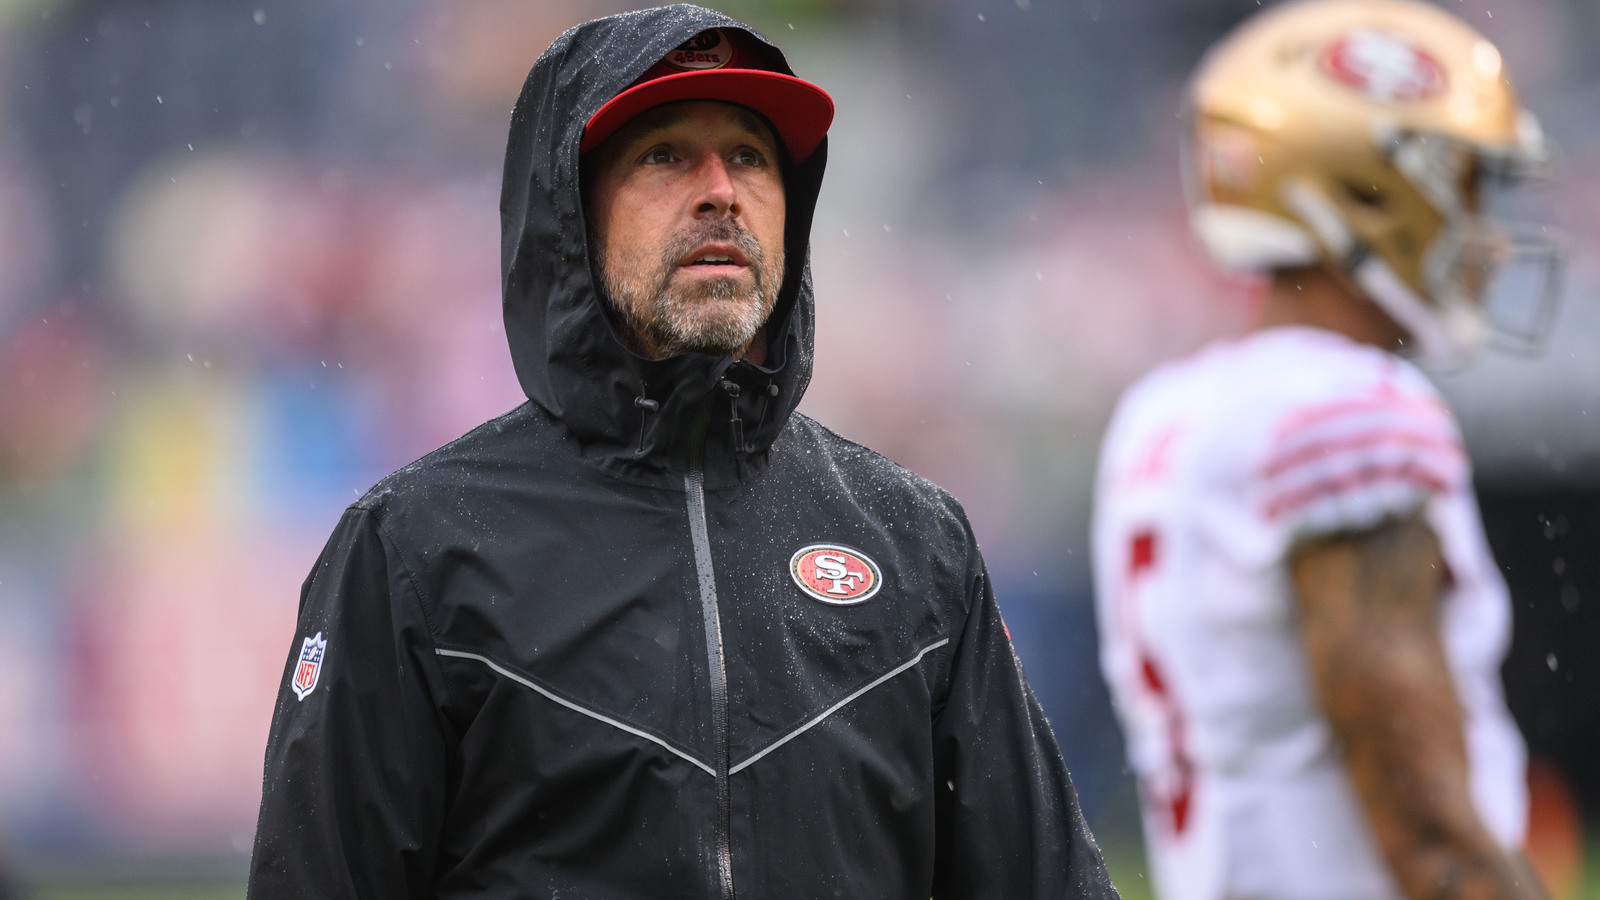 49ers practice and media schedule leading to Week 3 matchup vs